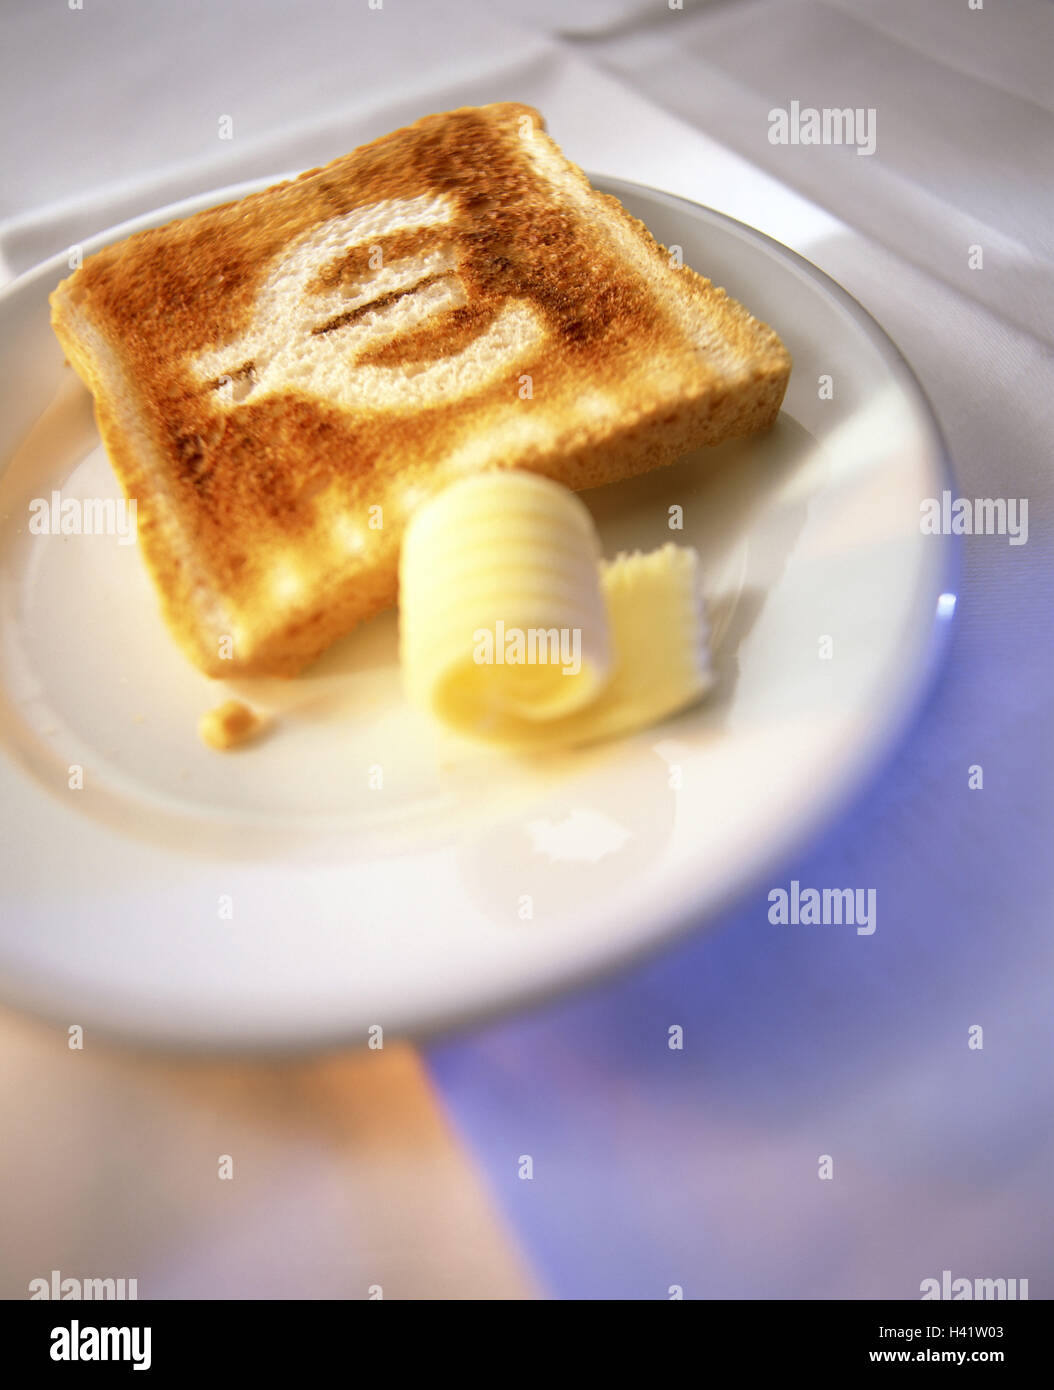 Breakfast table, detail, toast, eurocharacter, toasted breakfast, plate, bread, toast slice bread, toast bread, roasted, silhouette, contours, euro, currency figure, euroicon, currency sign, left blank, currency, European, butter, little butter role, icon Stock Photo